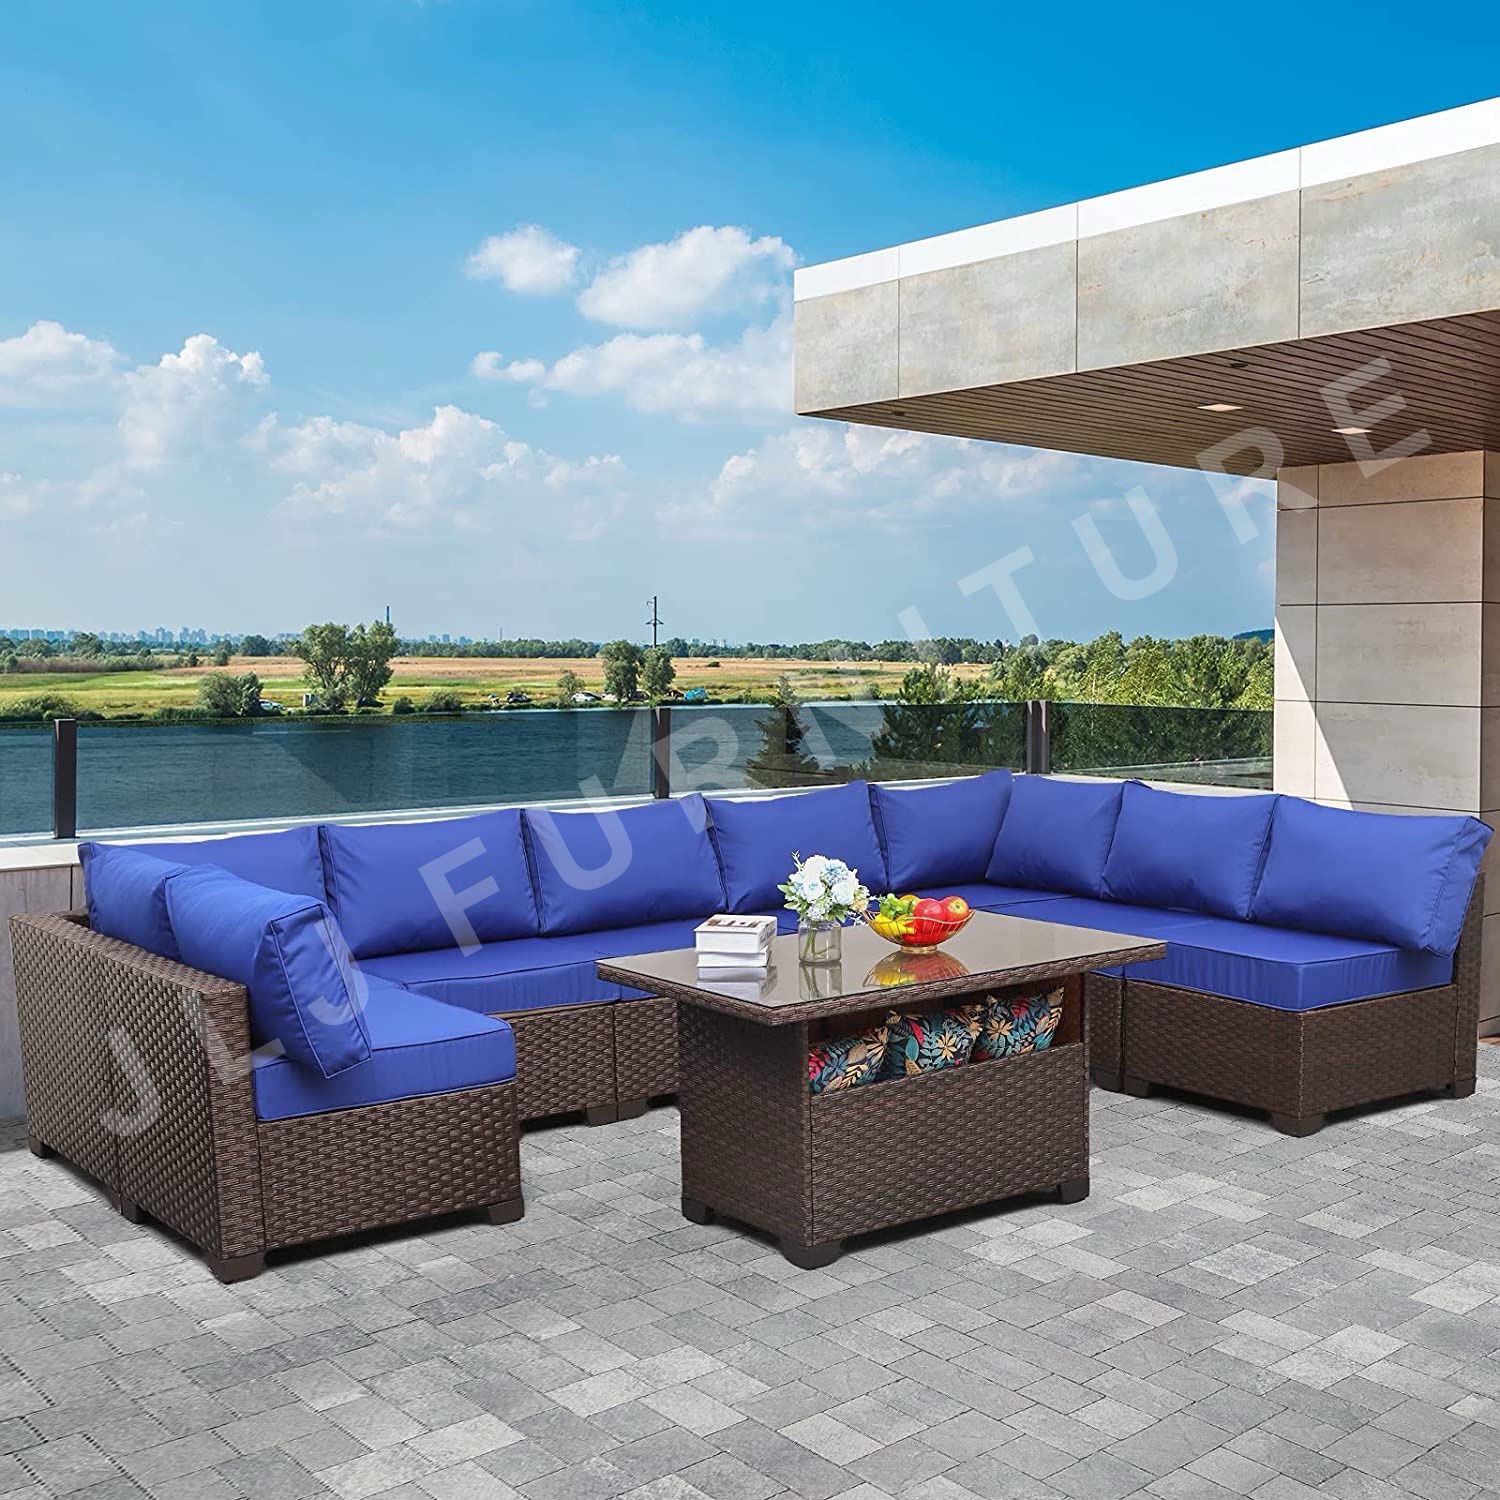 NEW🔥Outdoor Patio Furniture Brown Wicker Royal Blue 5" cushions 9 Pc Set with Cover ASSEMBLED